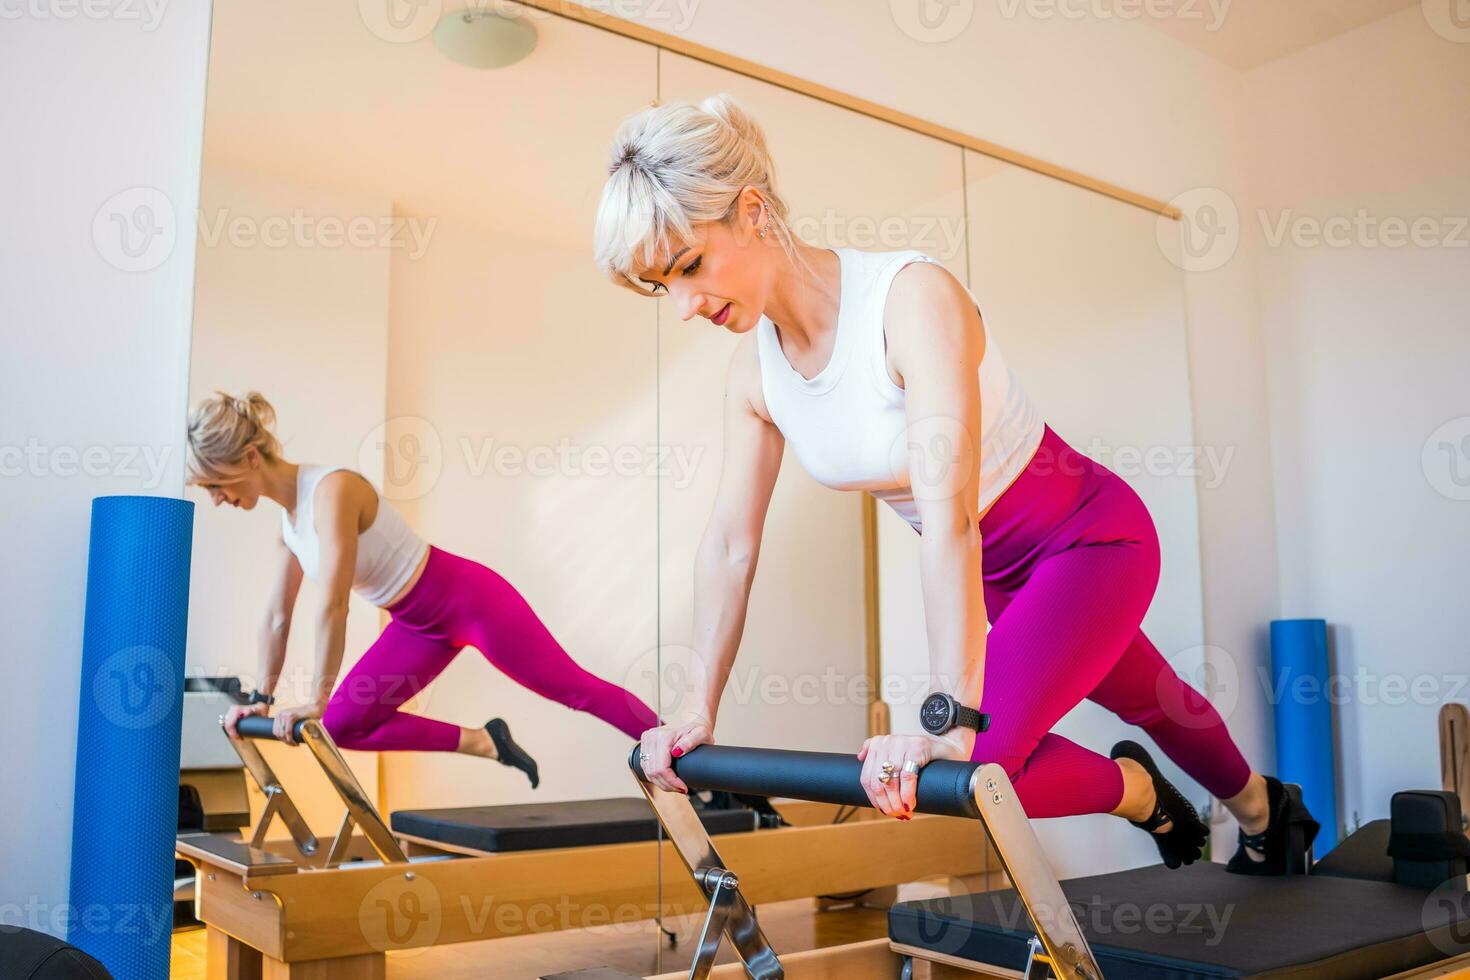 Blonde woman is exercising on pilates reformer bed in her home. photo